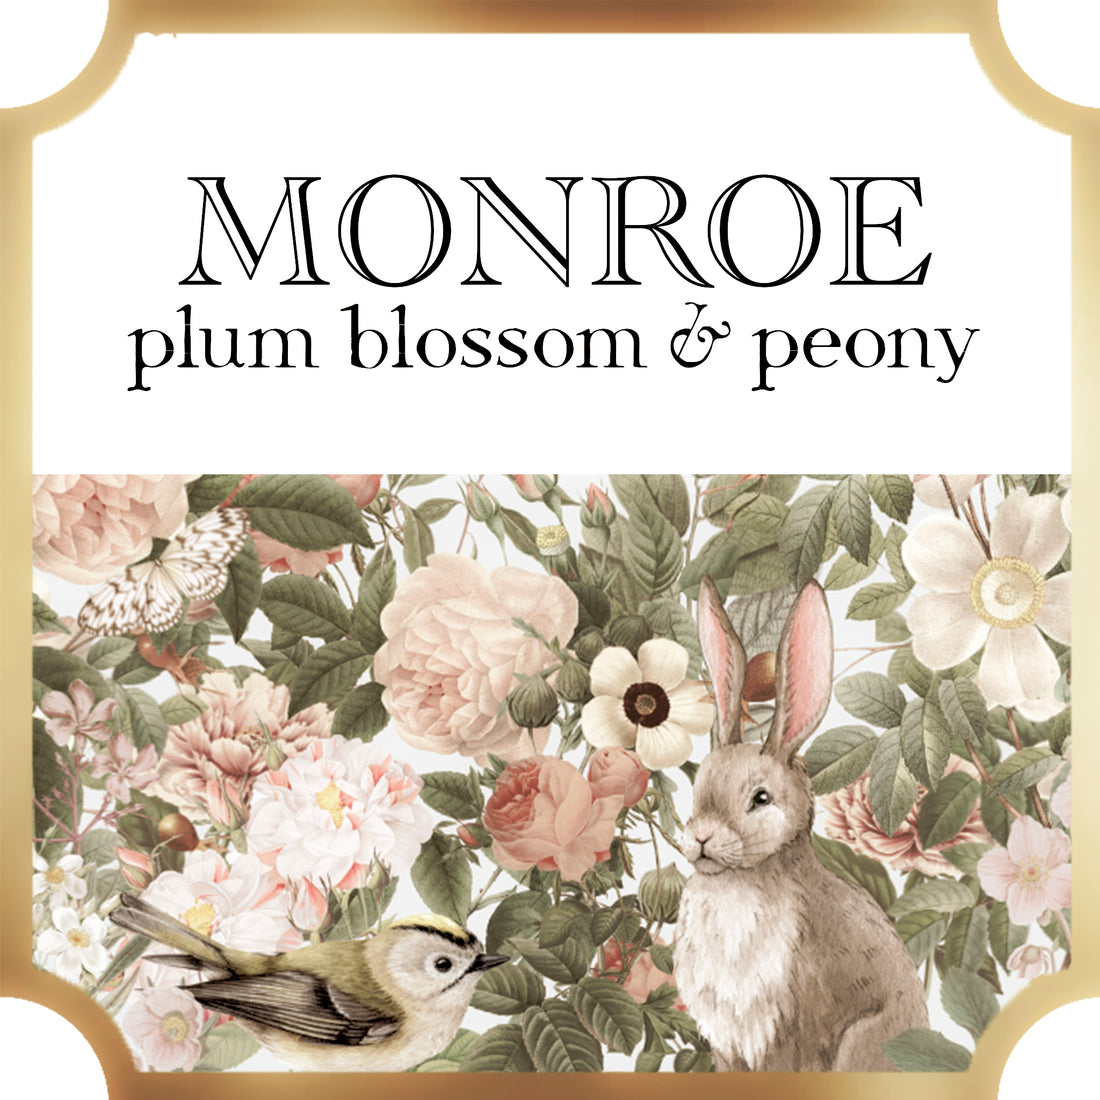  monroe collection a pleasant thought